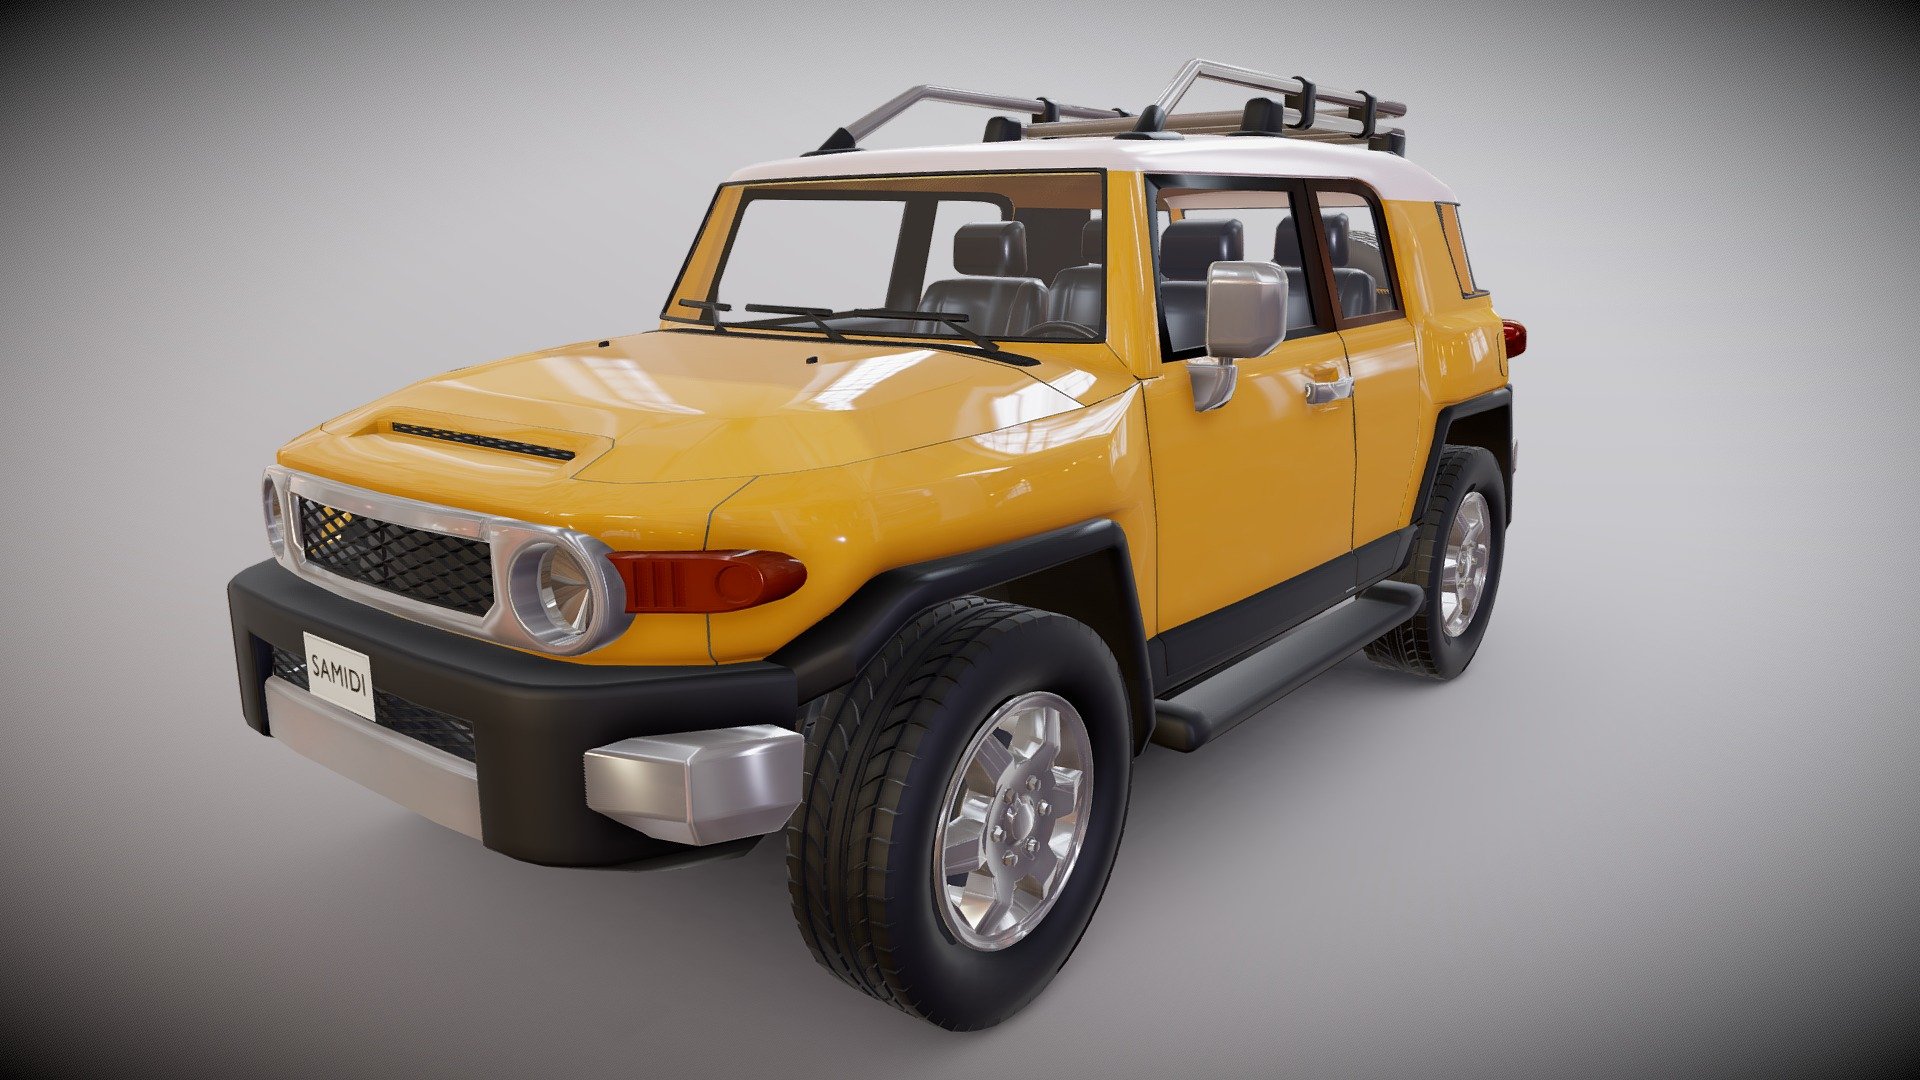 SUV model. Asset ready to use. 4 texture (Interior 3/Number plane 1). Separated steering wheel. Detailed suspension 3d model